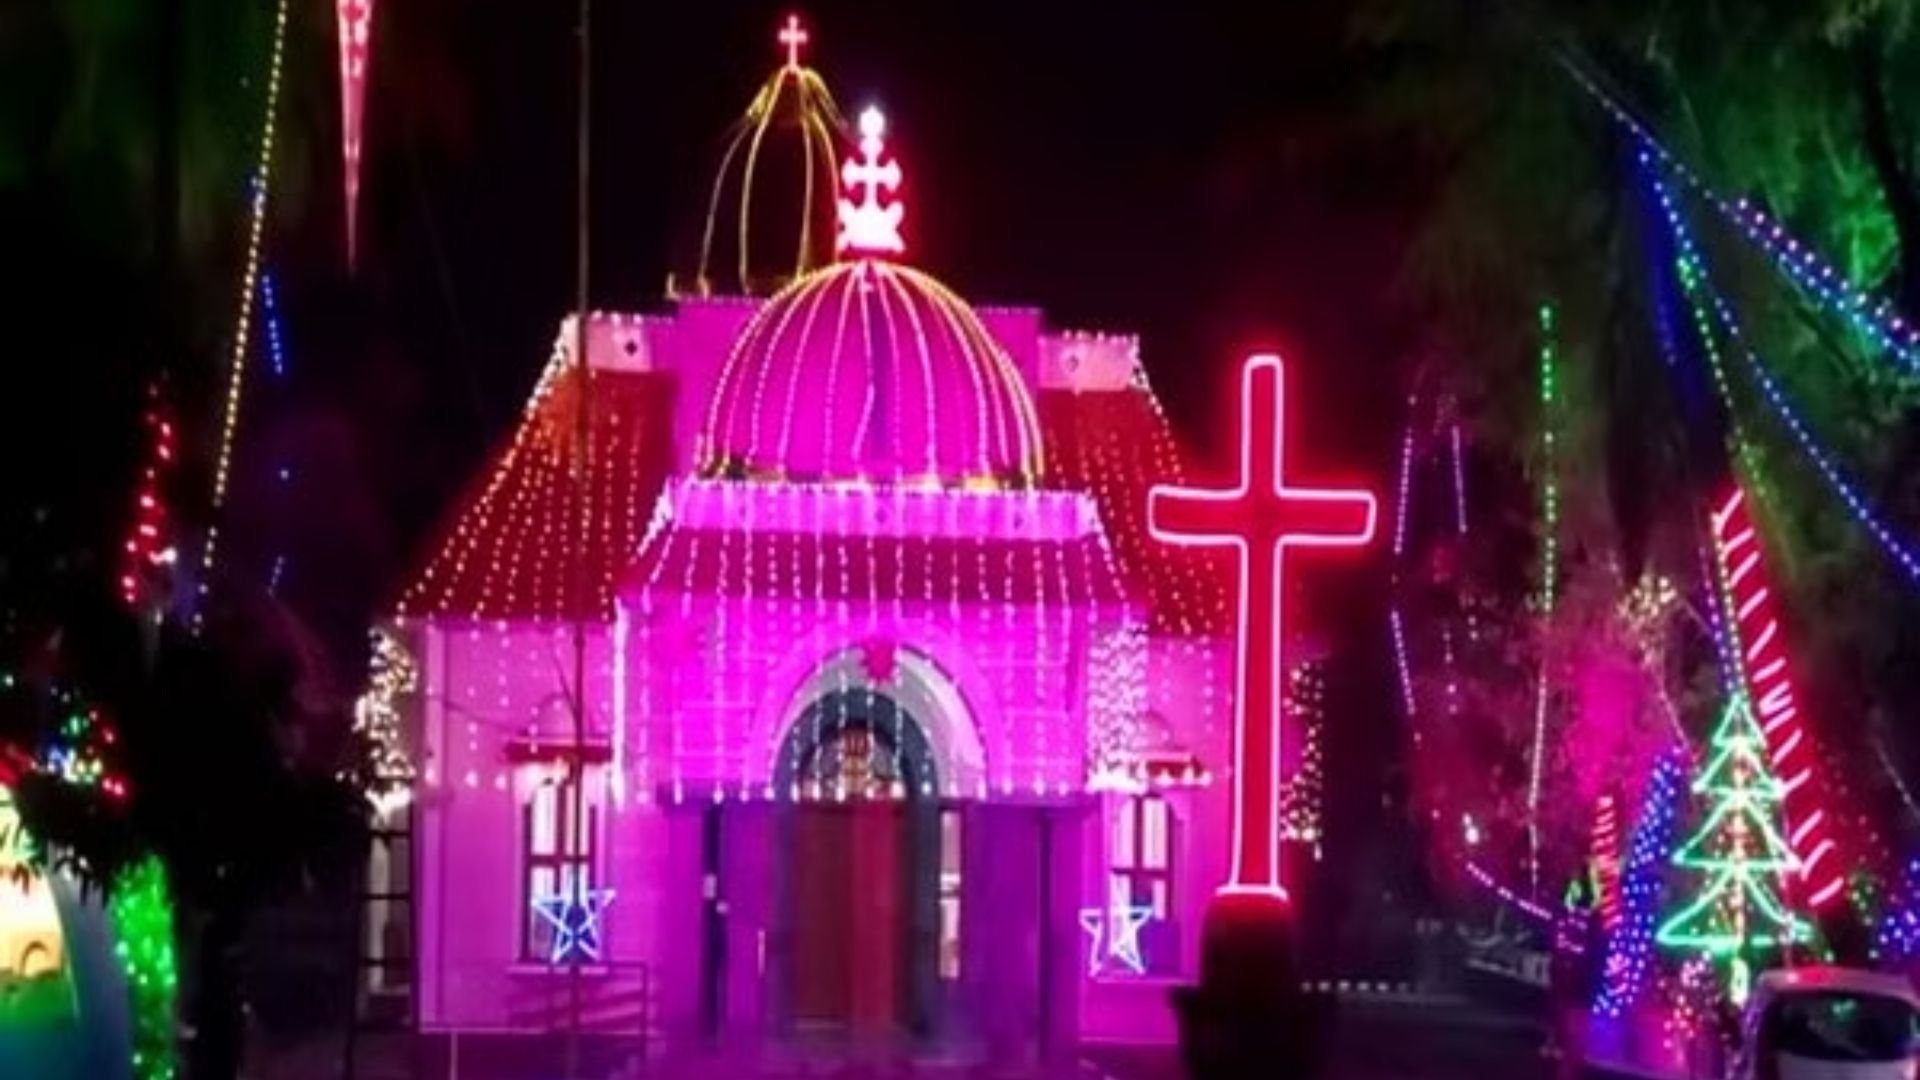 Churches in Ujjain lit up and decorated ahead of Christmas